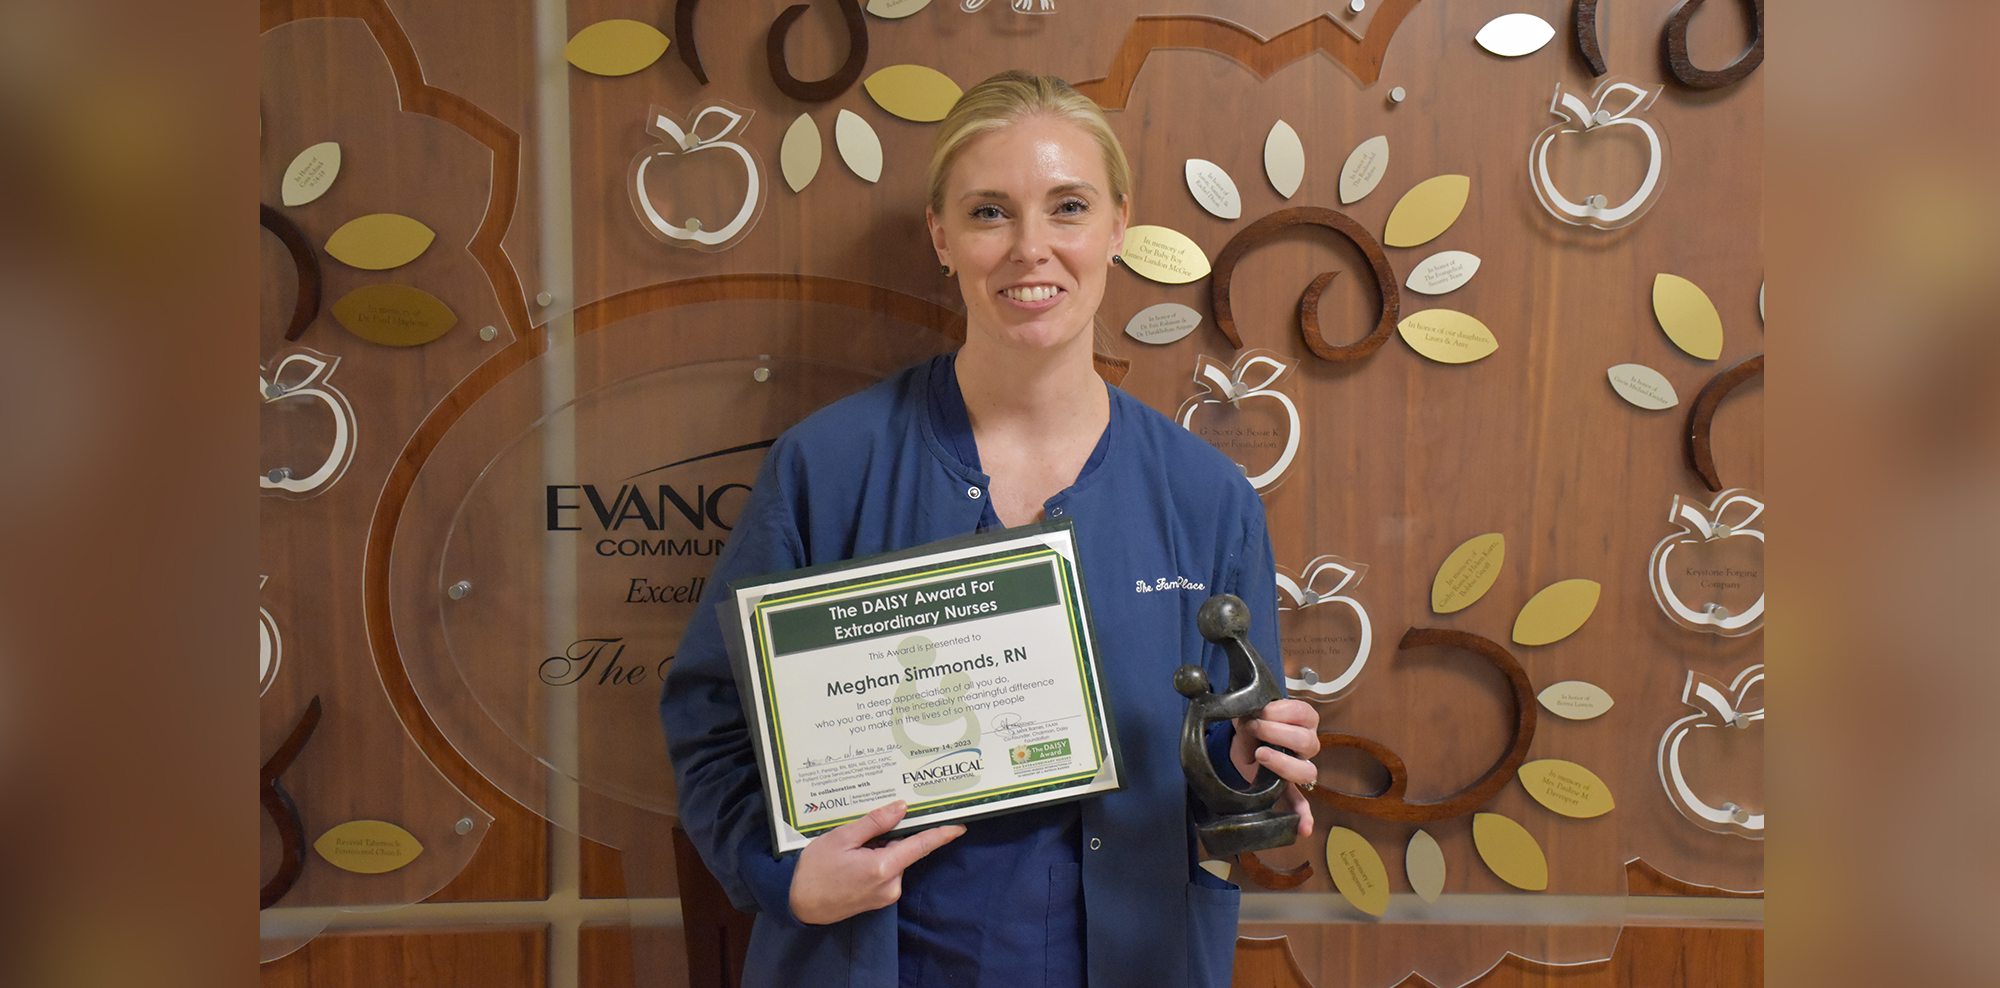 Evangelical Community Hospital Awards DAISY Honor for Nursing Excellence to Meghan Simmonds, RN